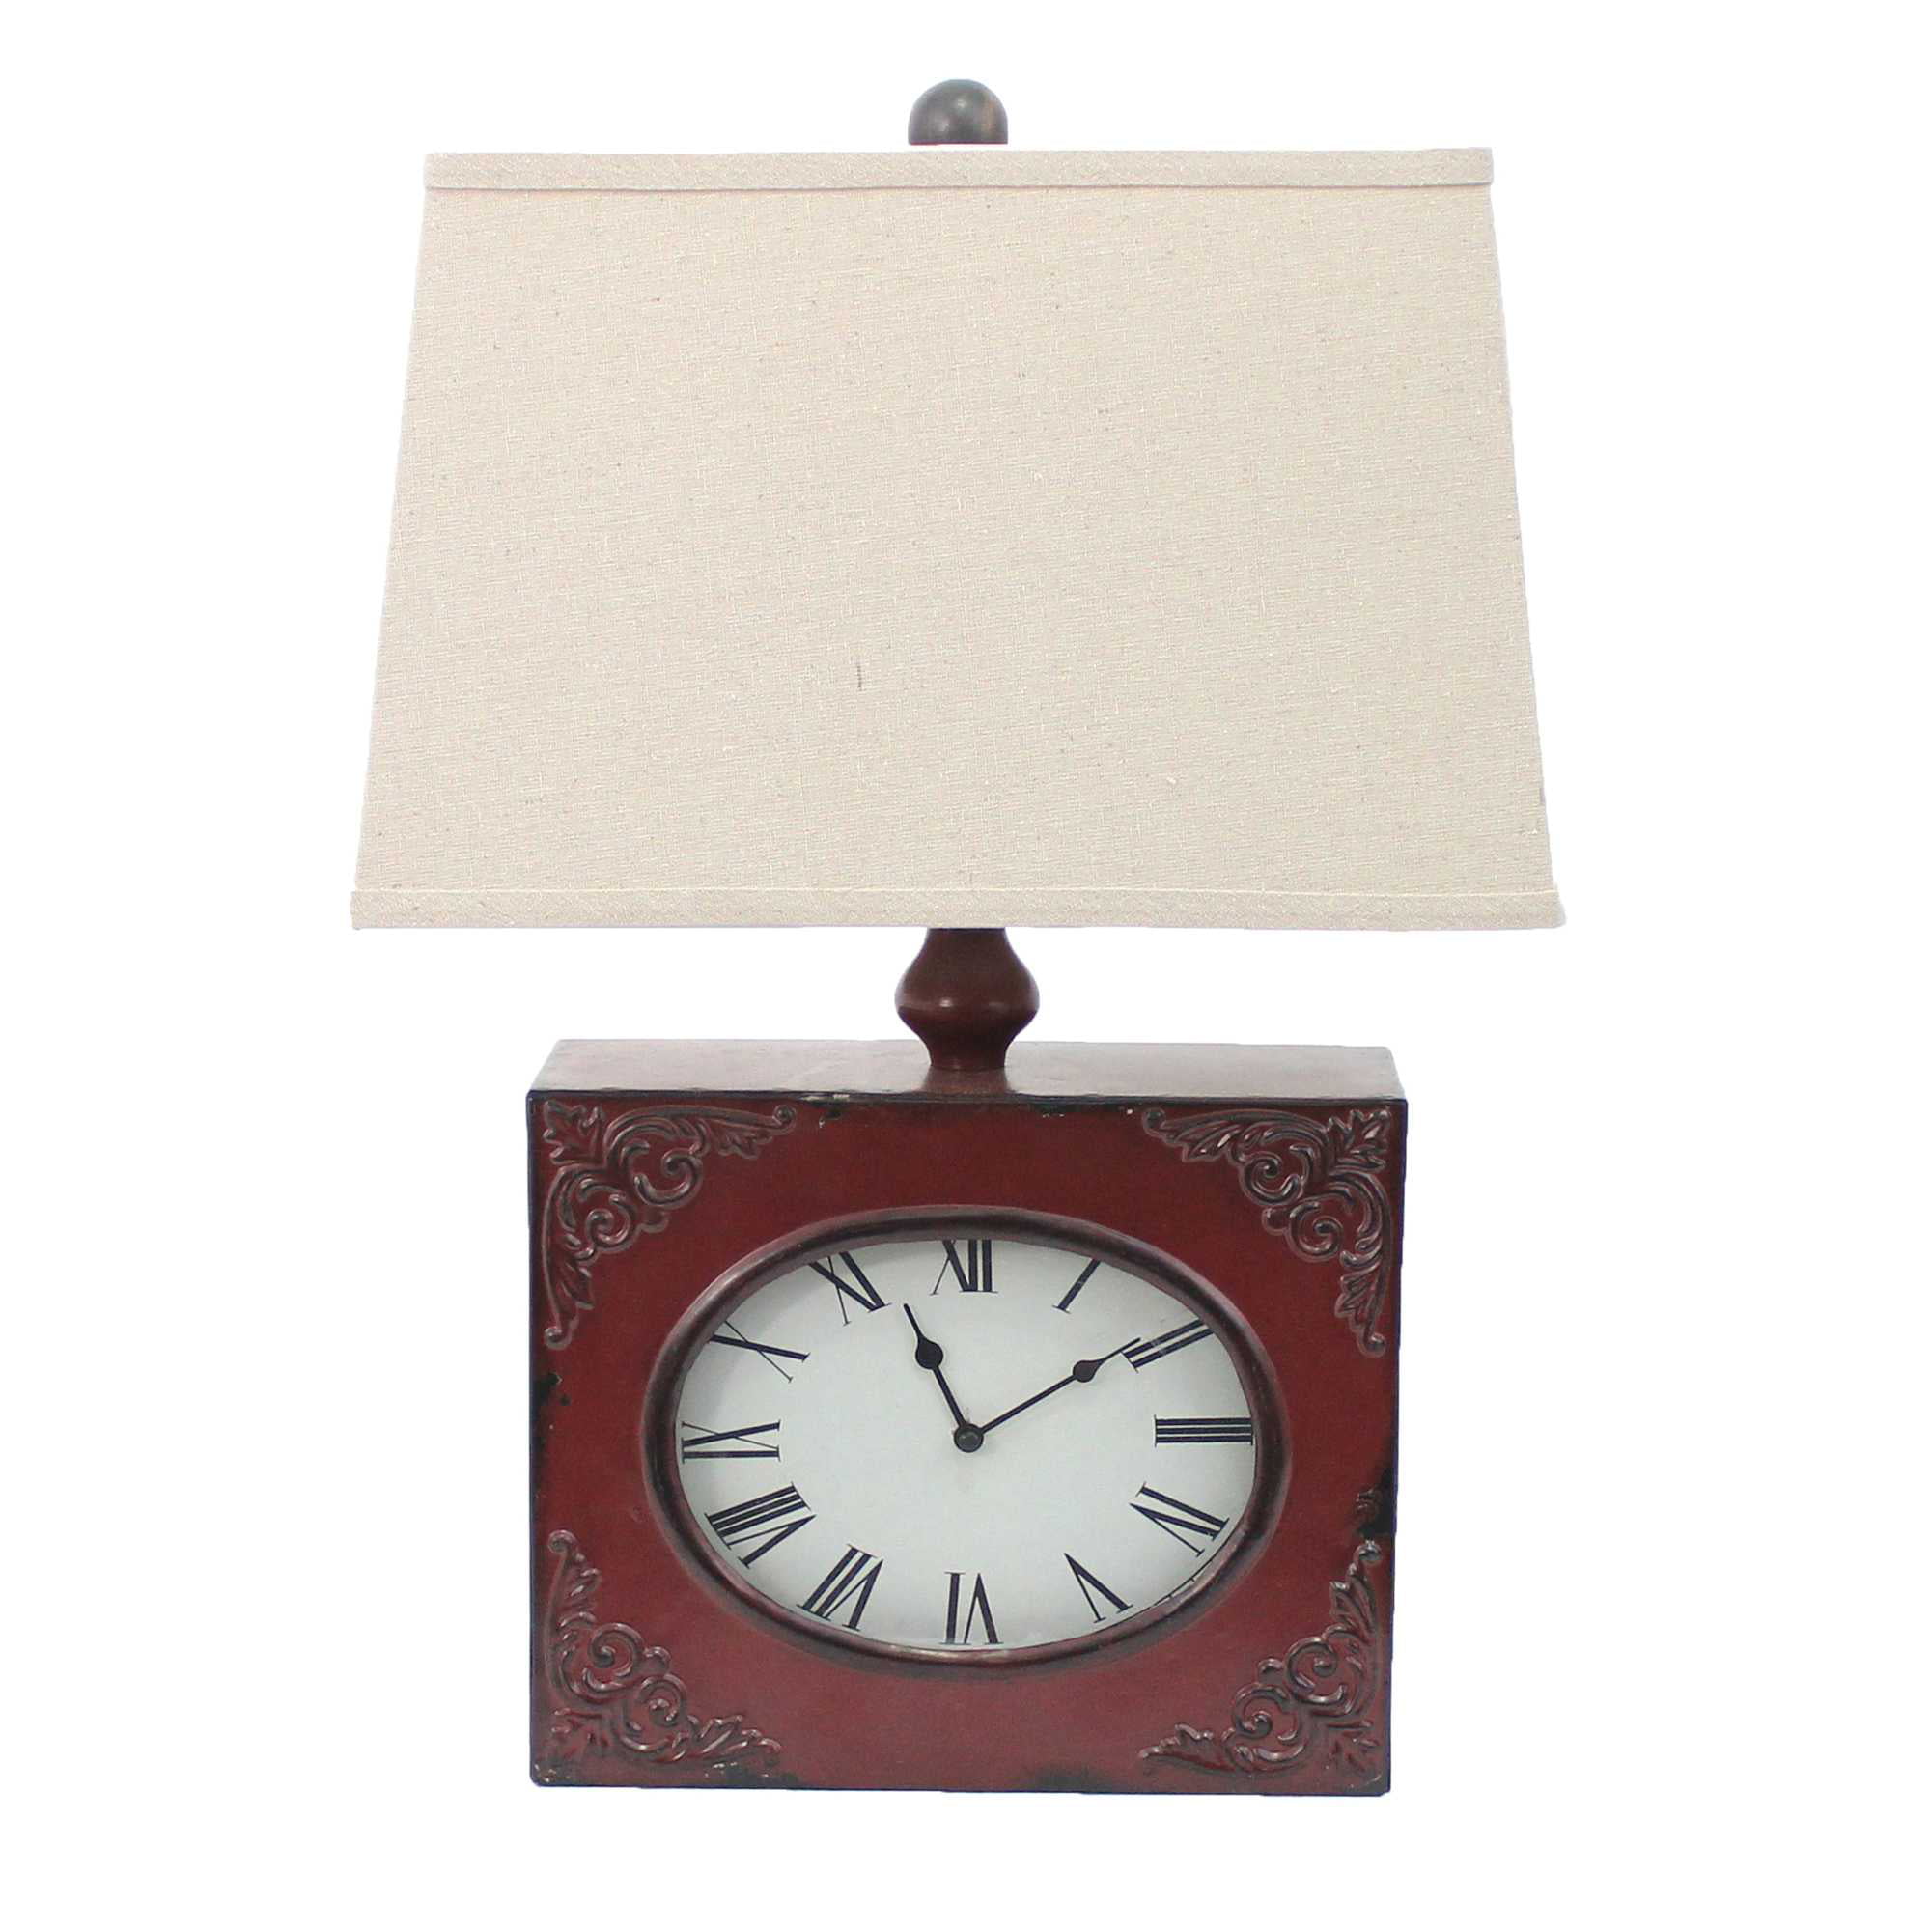 Vintage Table Lamp With Metal, Table Lamp With Clock